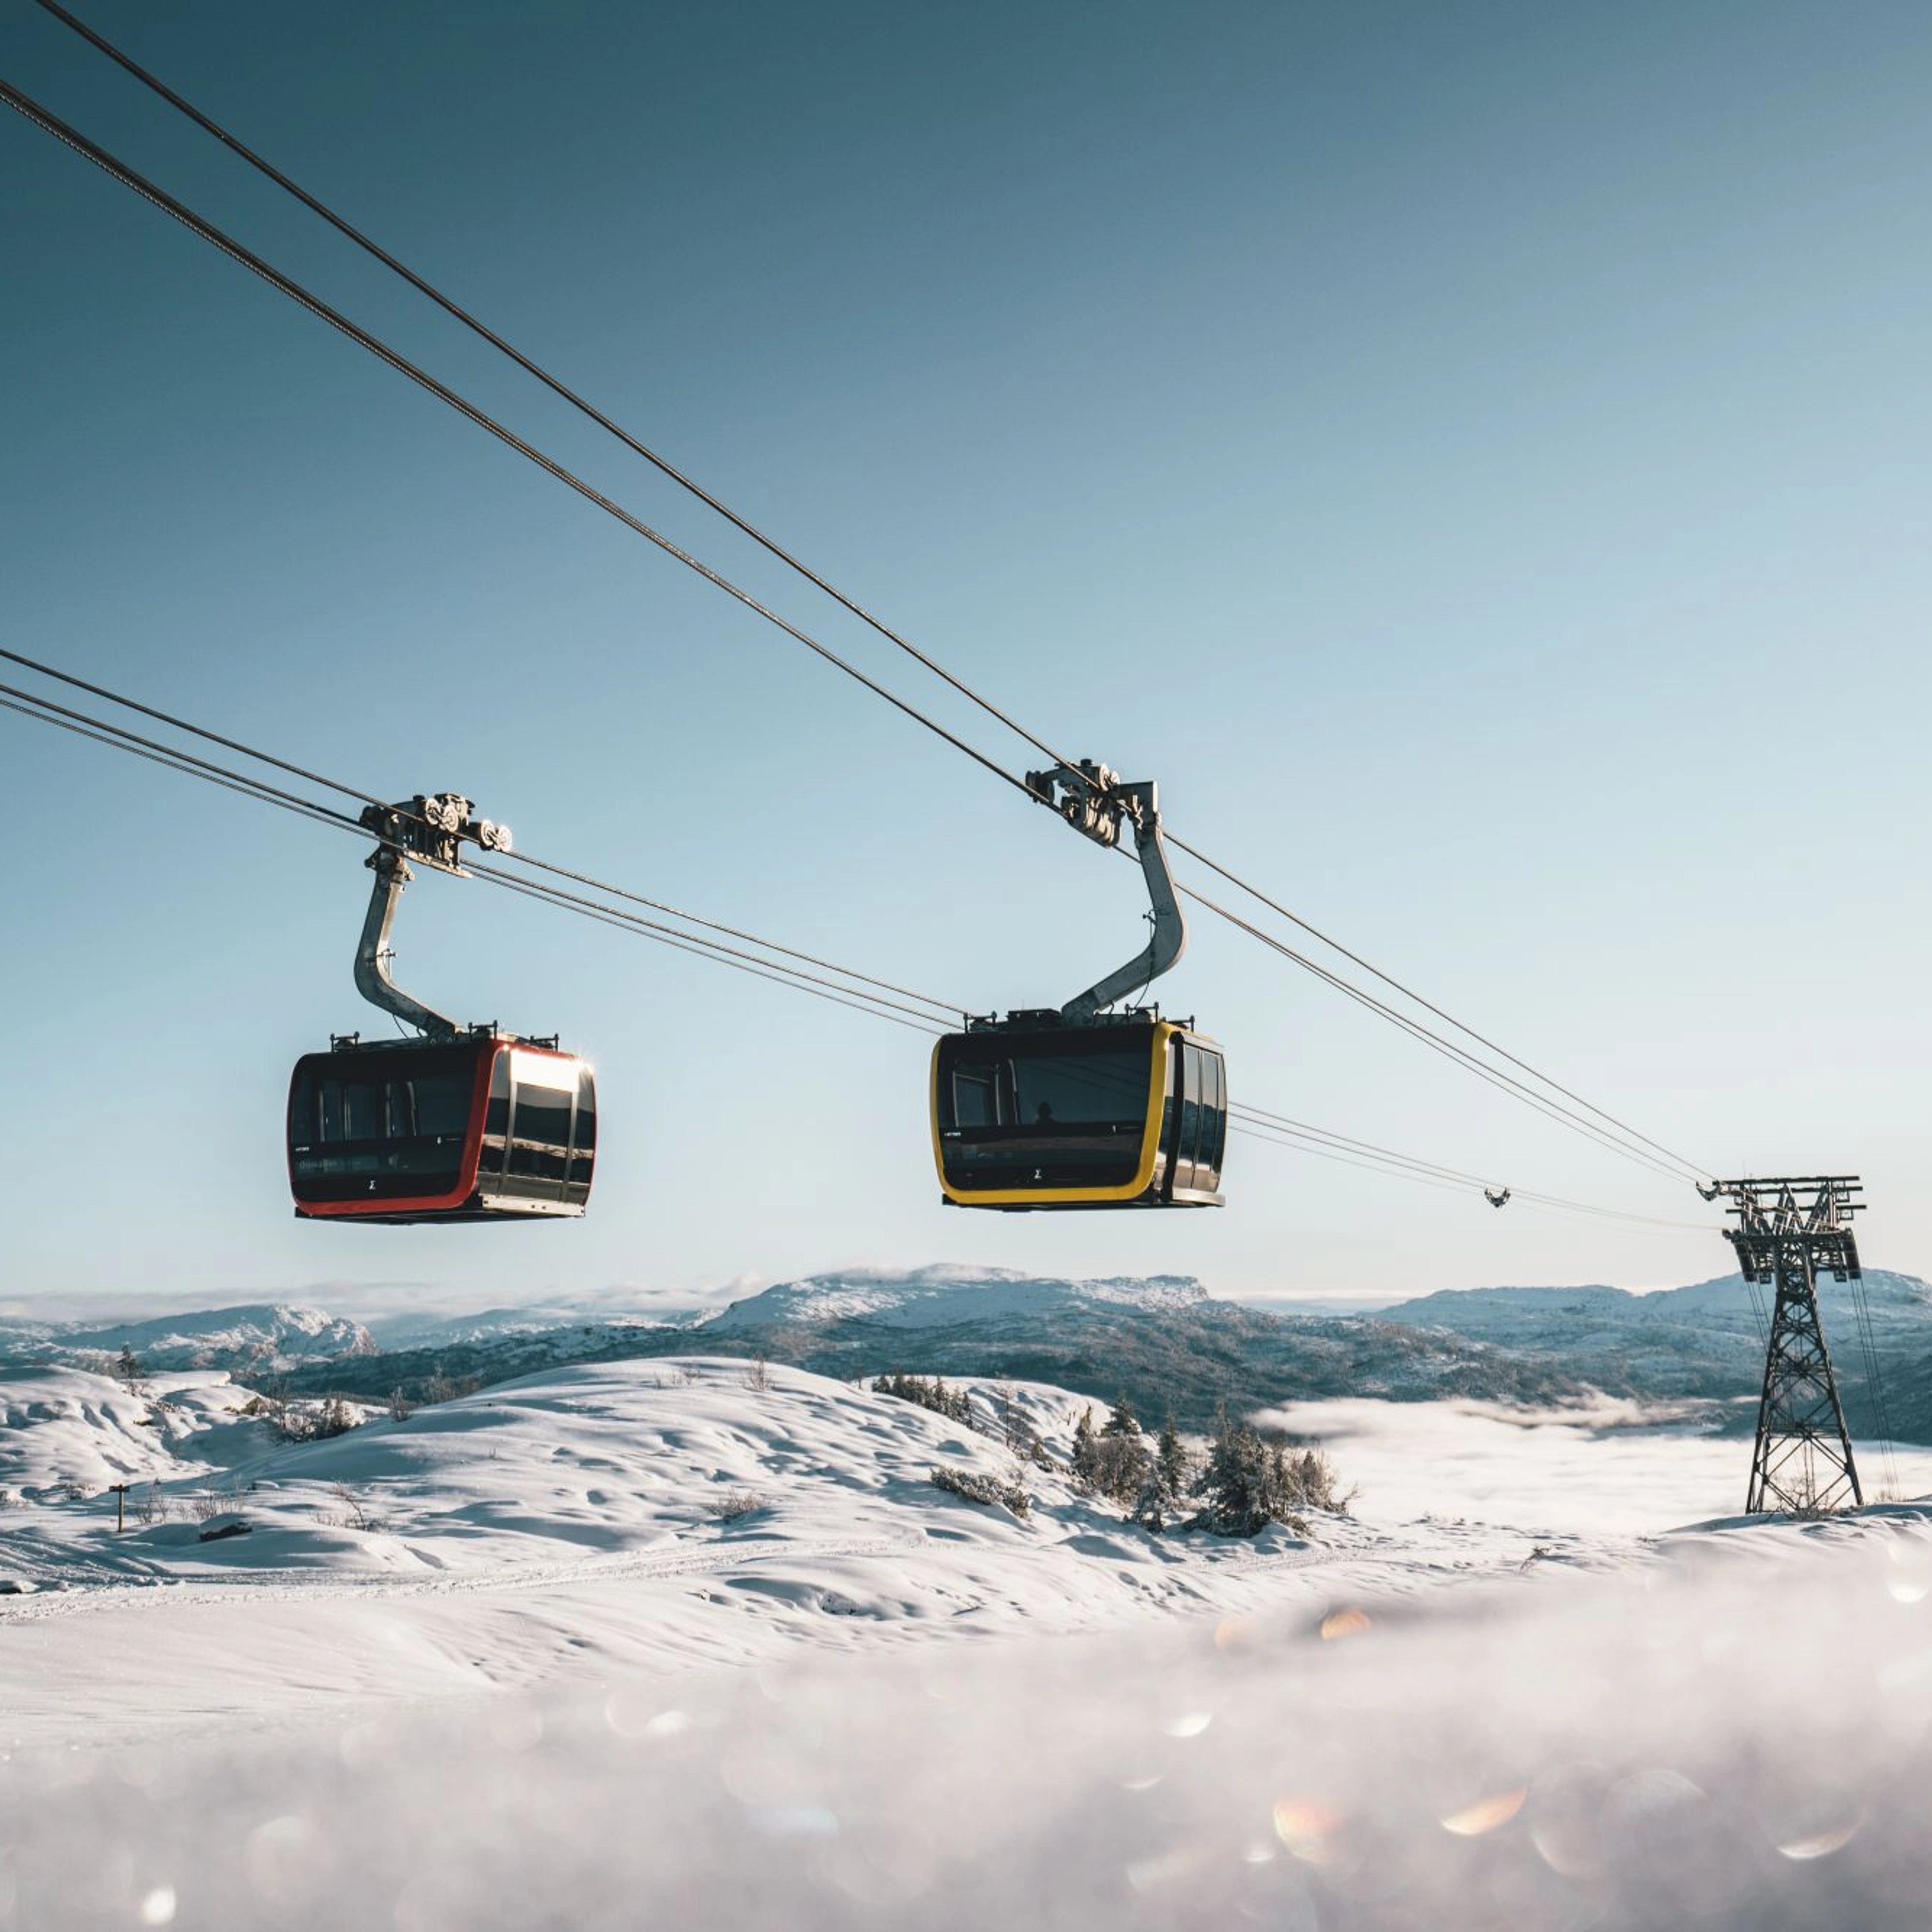 Voss Gondola hovers over the clouds - Activities at Voss, Norway